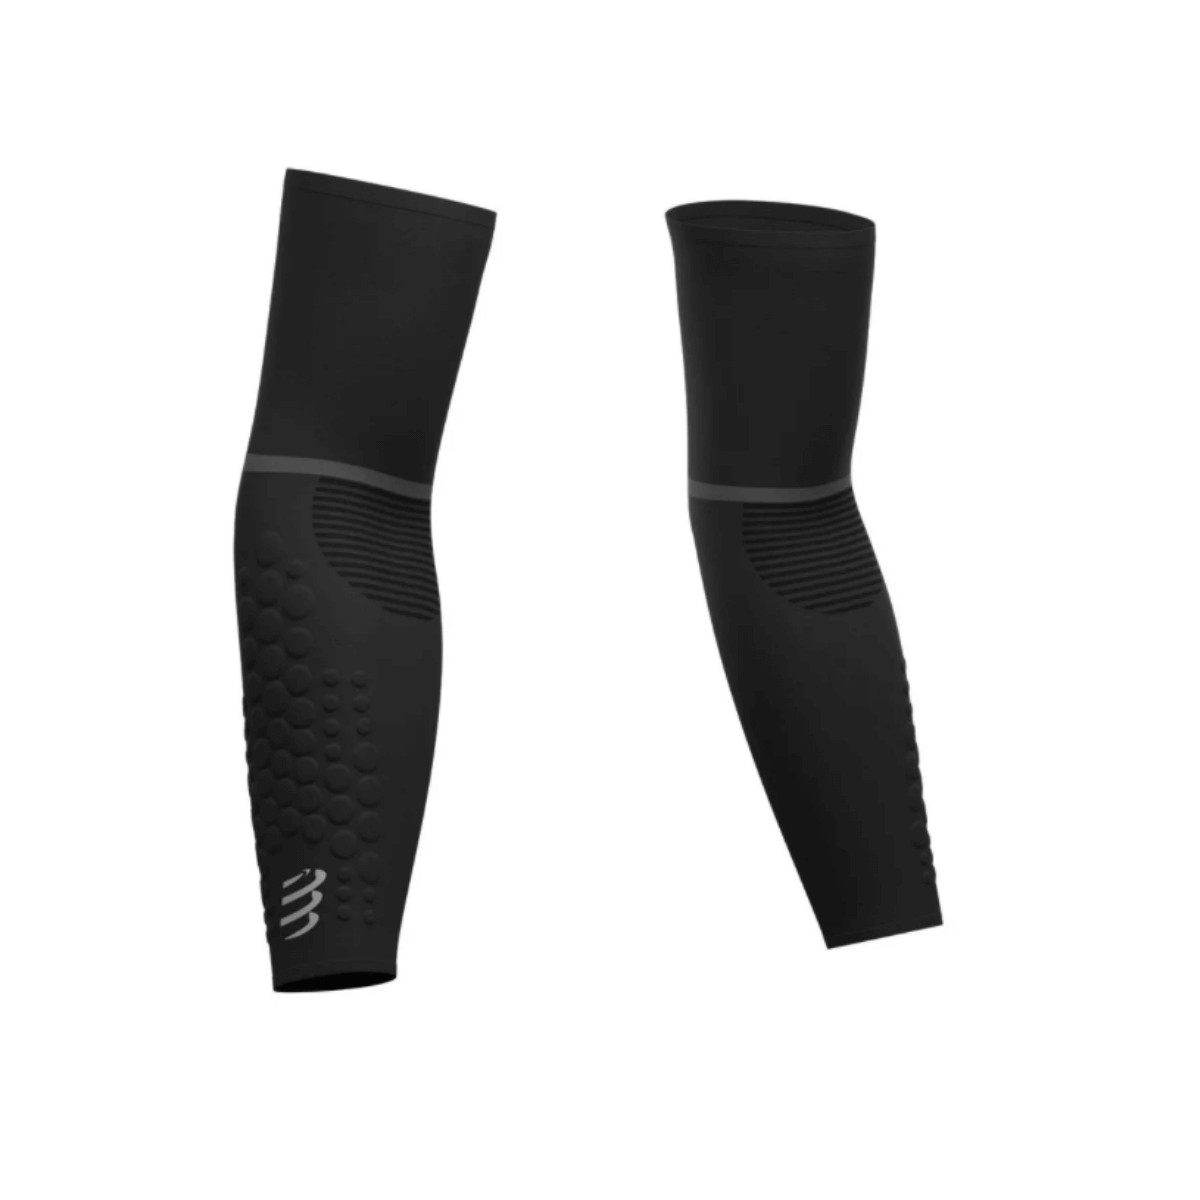 Manchons Compressport Arm Force Ultralight Noir, Taille Taille 3